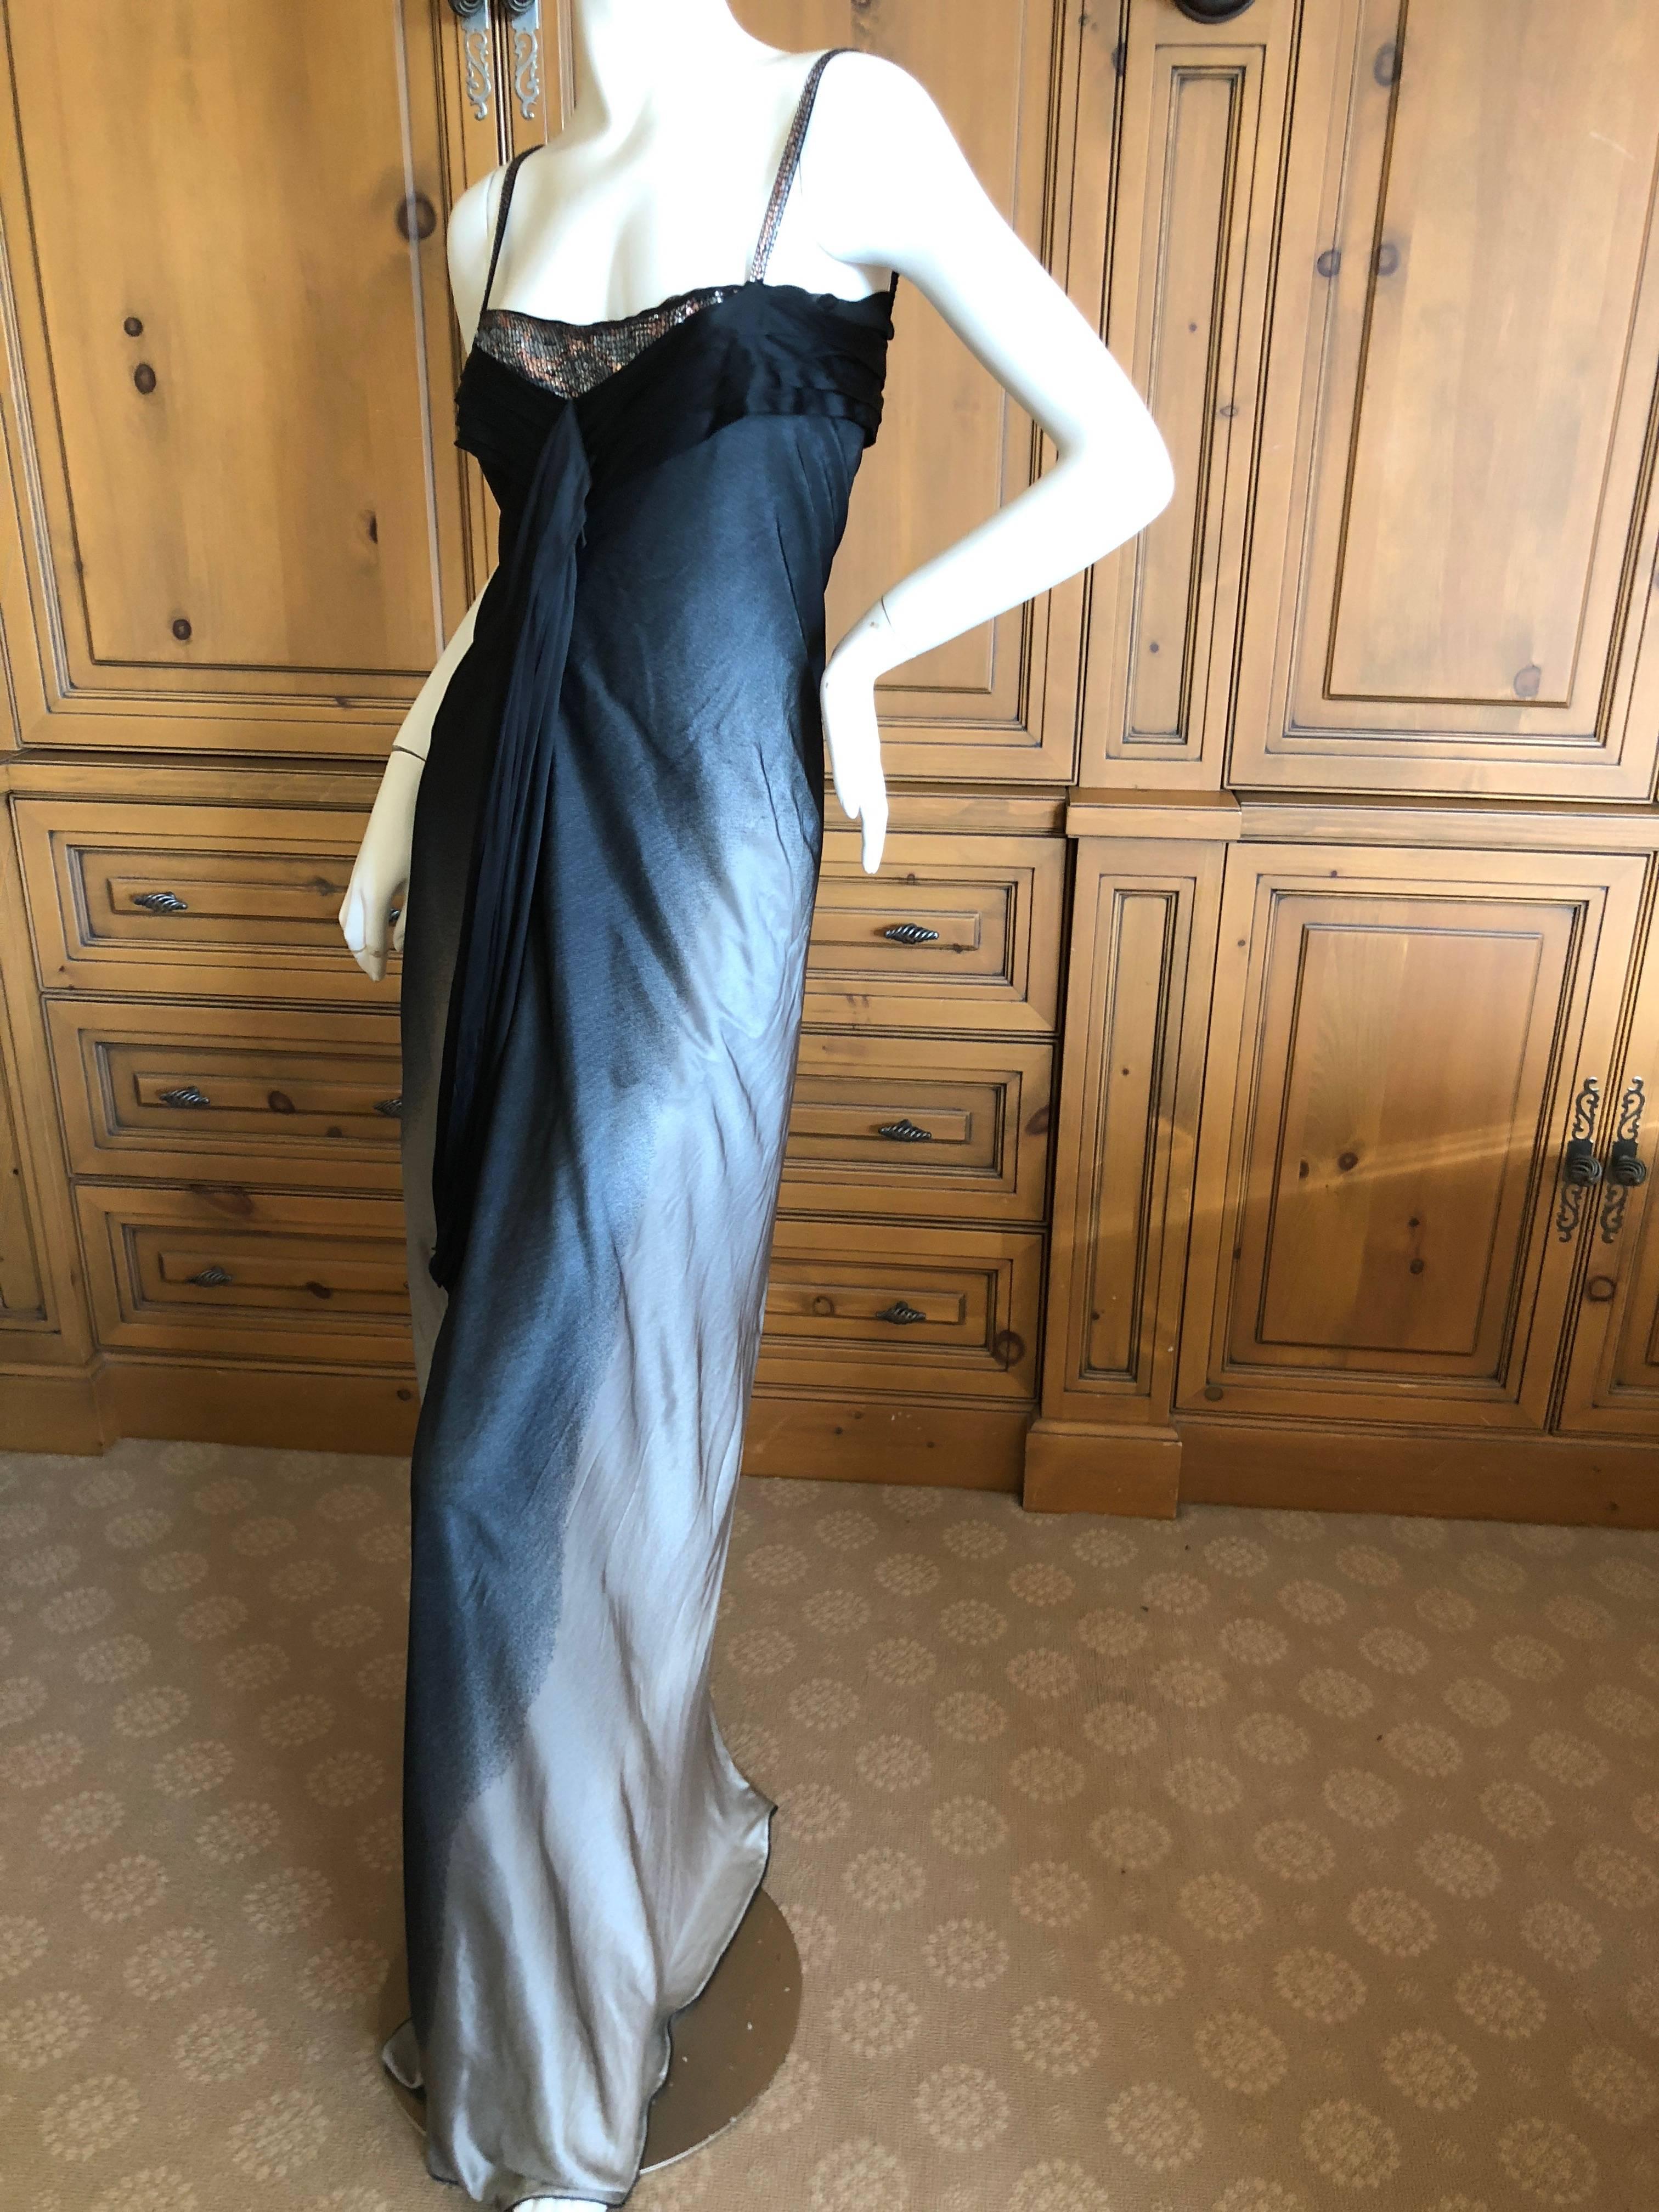 Christian Lacroix Silver and Black Vintage Silk Evening Dress with Sequin Detail.
Ombre silver gray and black, in viscose.
Size M
Bust 34